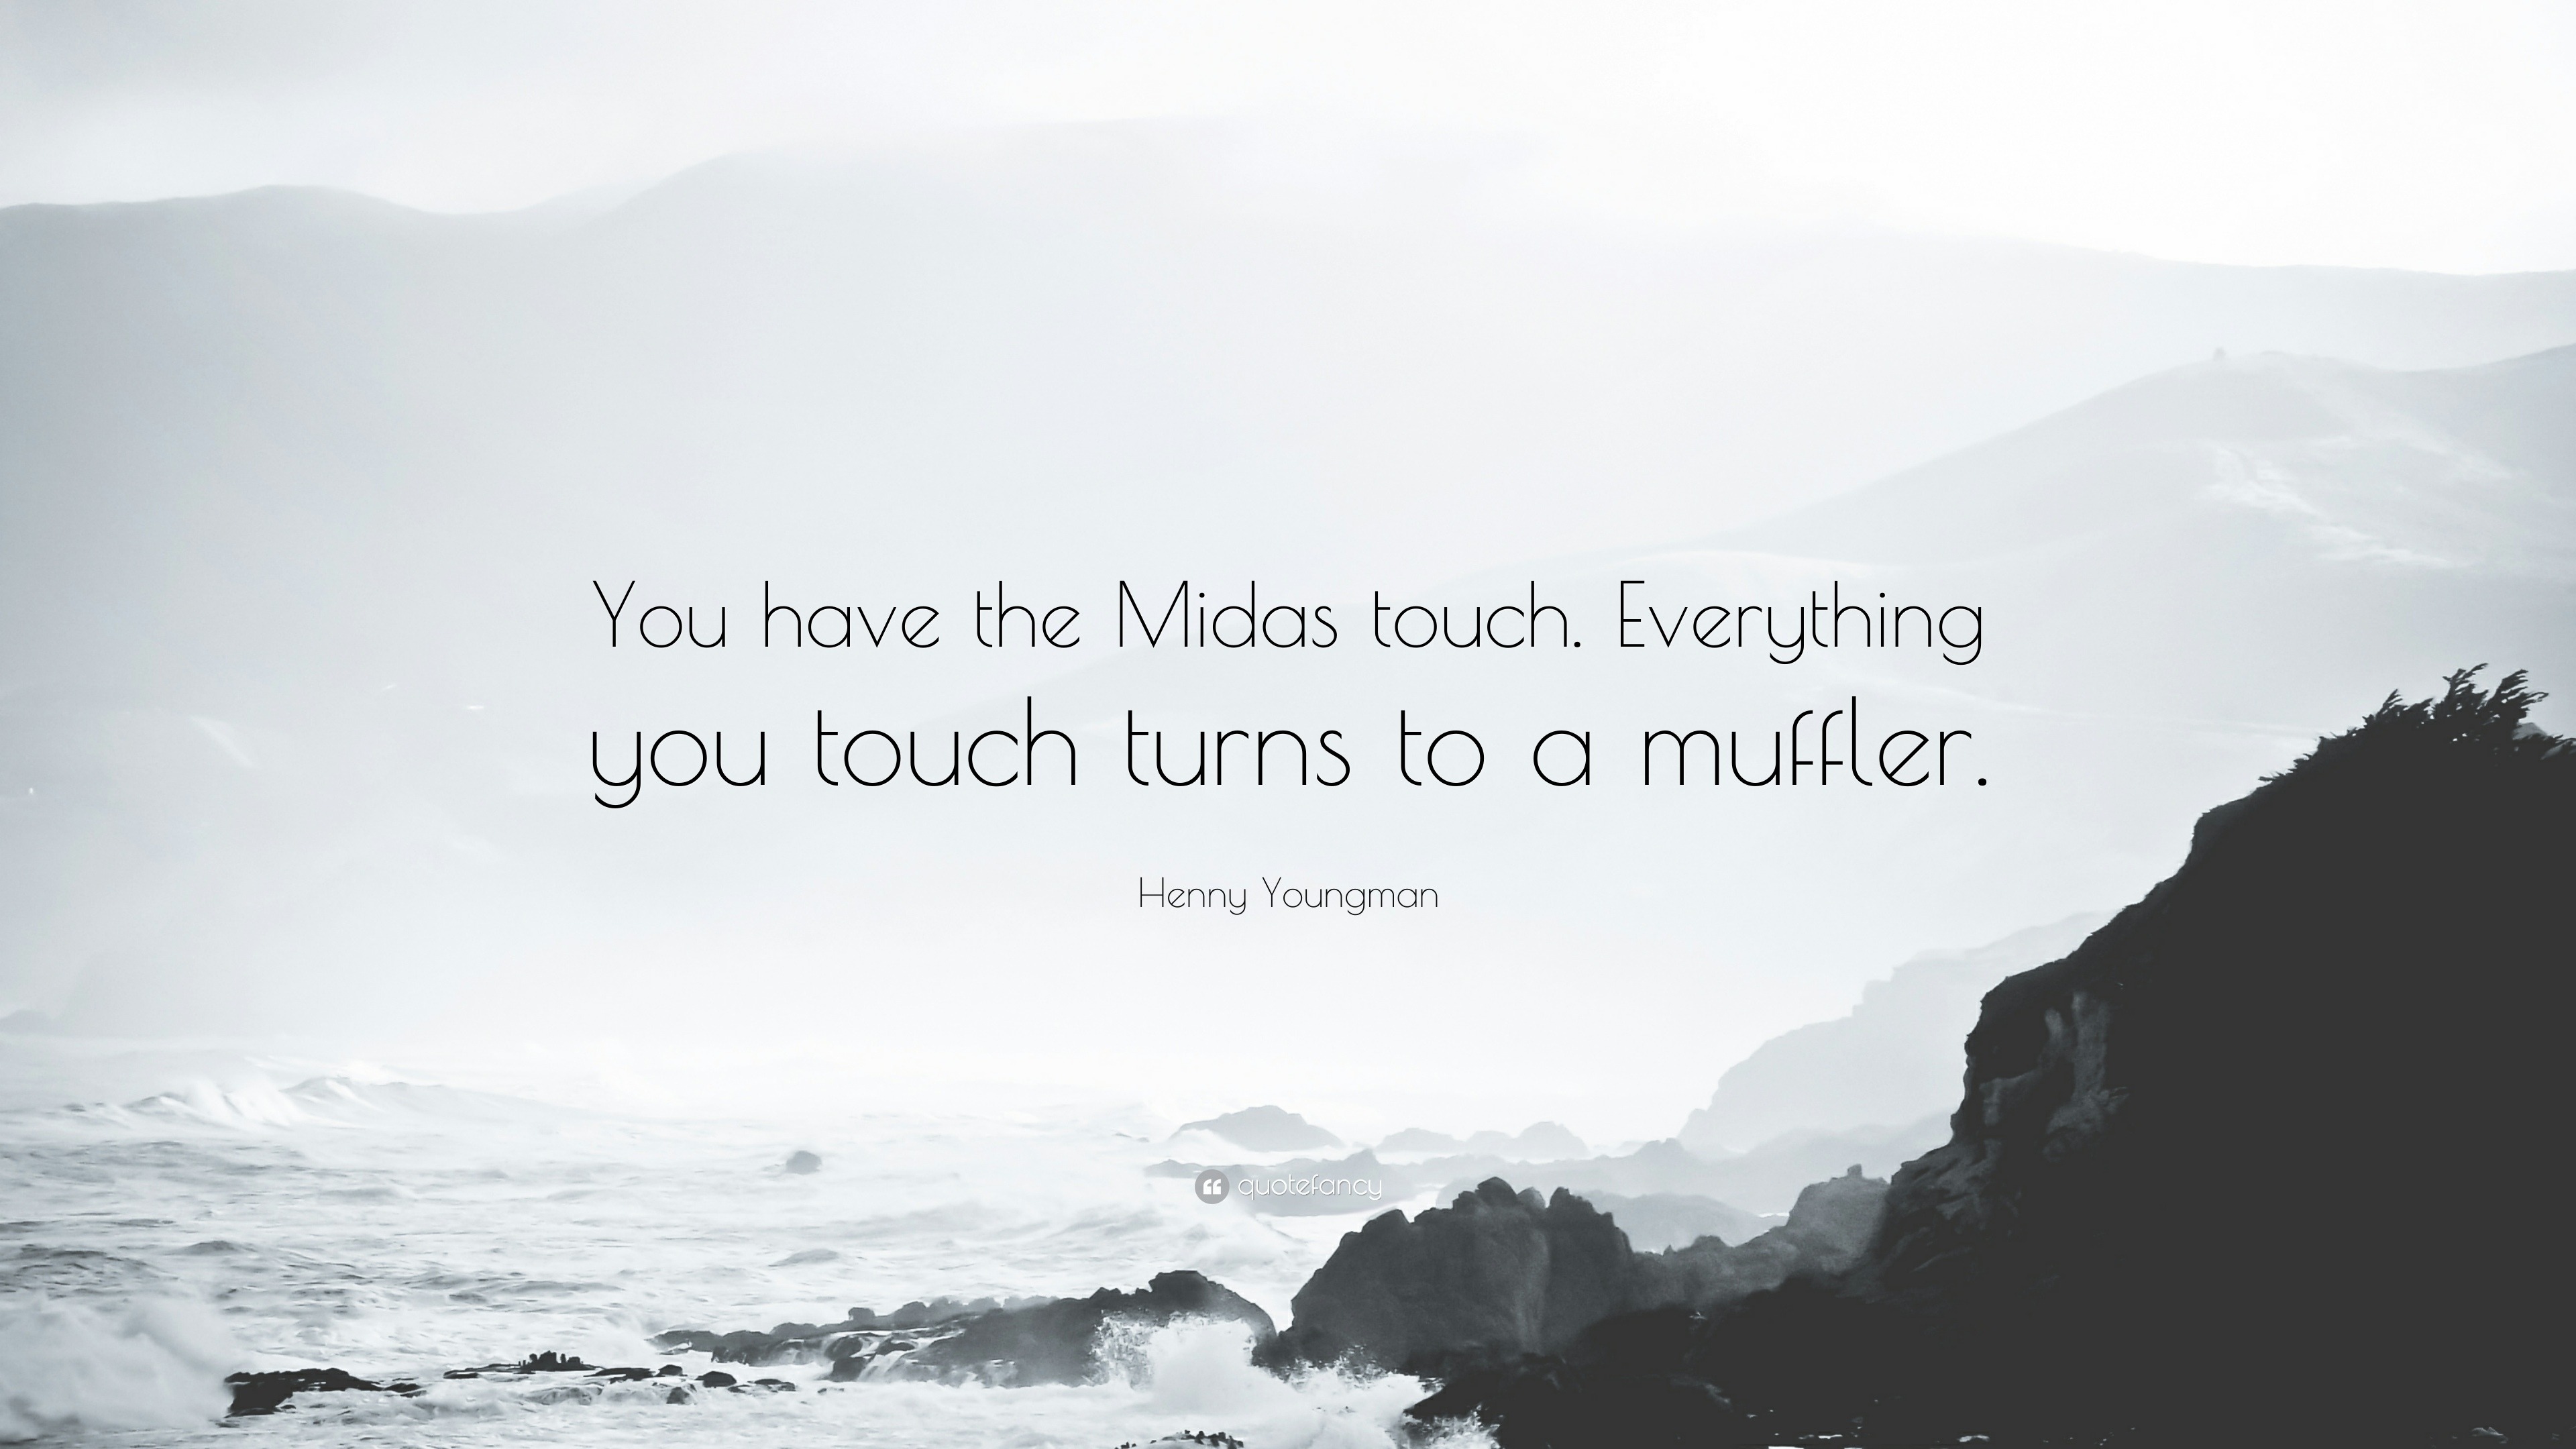 Henny Youngman Quote: “You have the Midas touch. Everything you touch turns  to a muffler.”